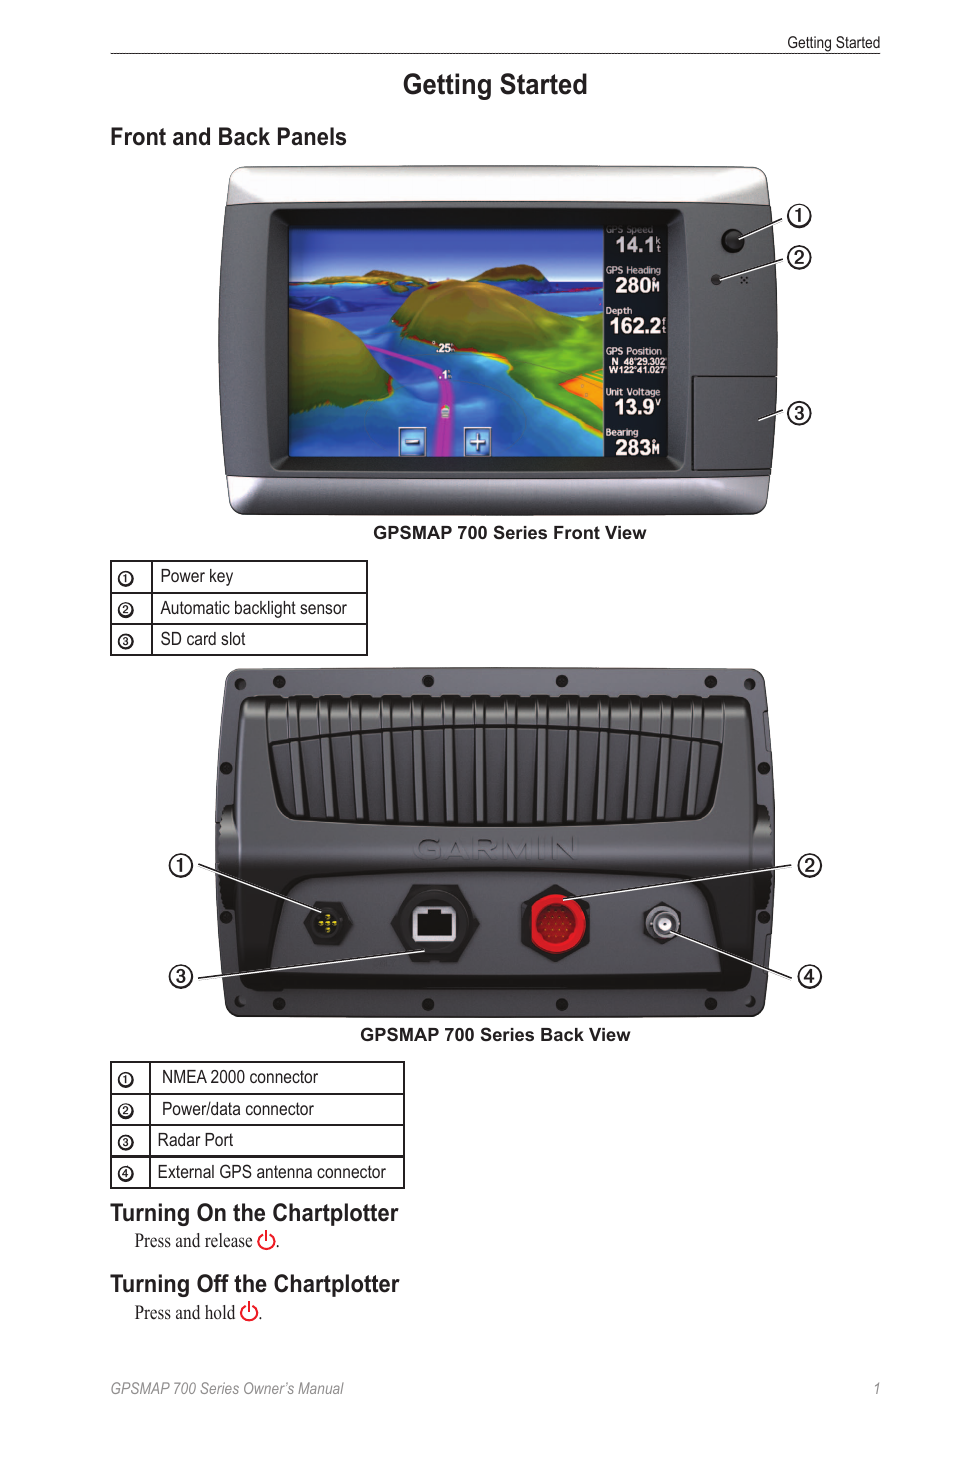 Getting started, Front and back panels, Turning on the chartplotter | Garmin  GPSMAP 740s User Manual | Page 5 / 100